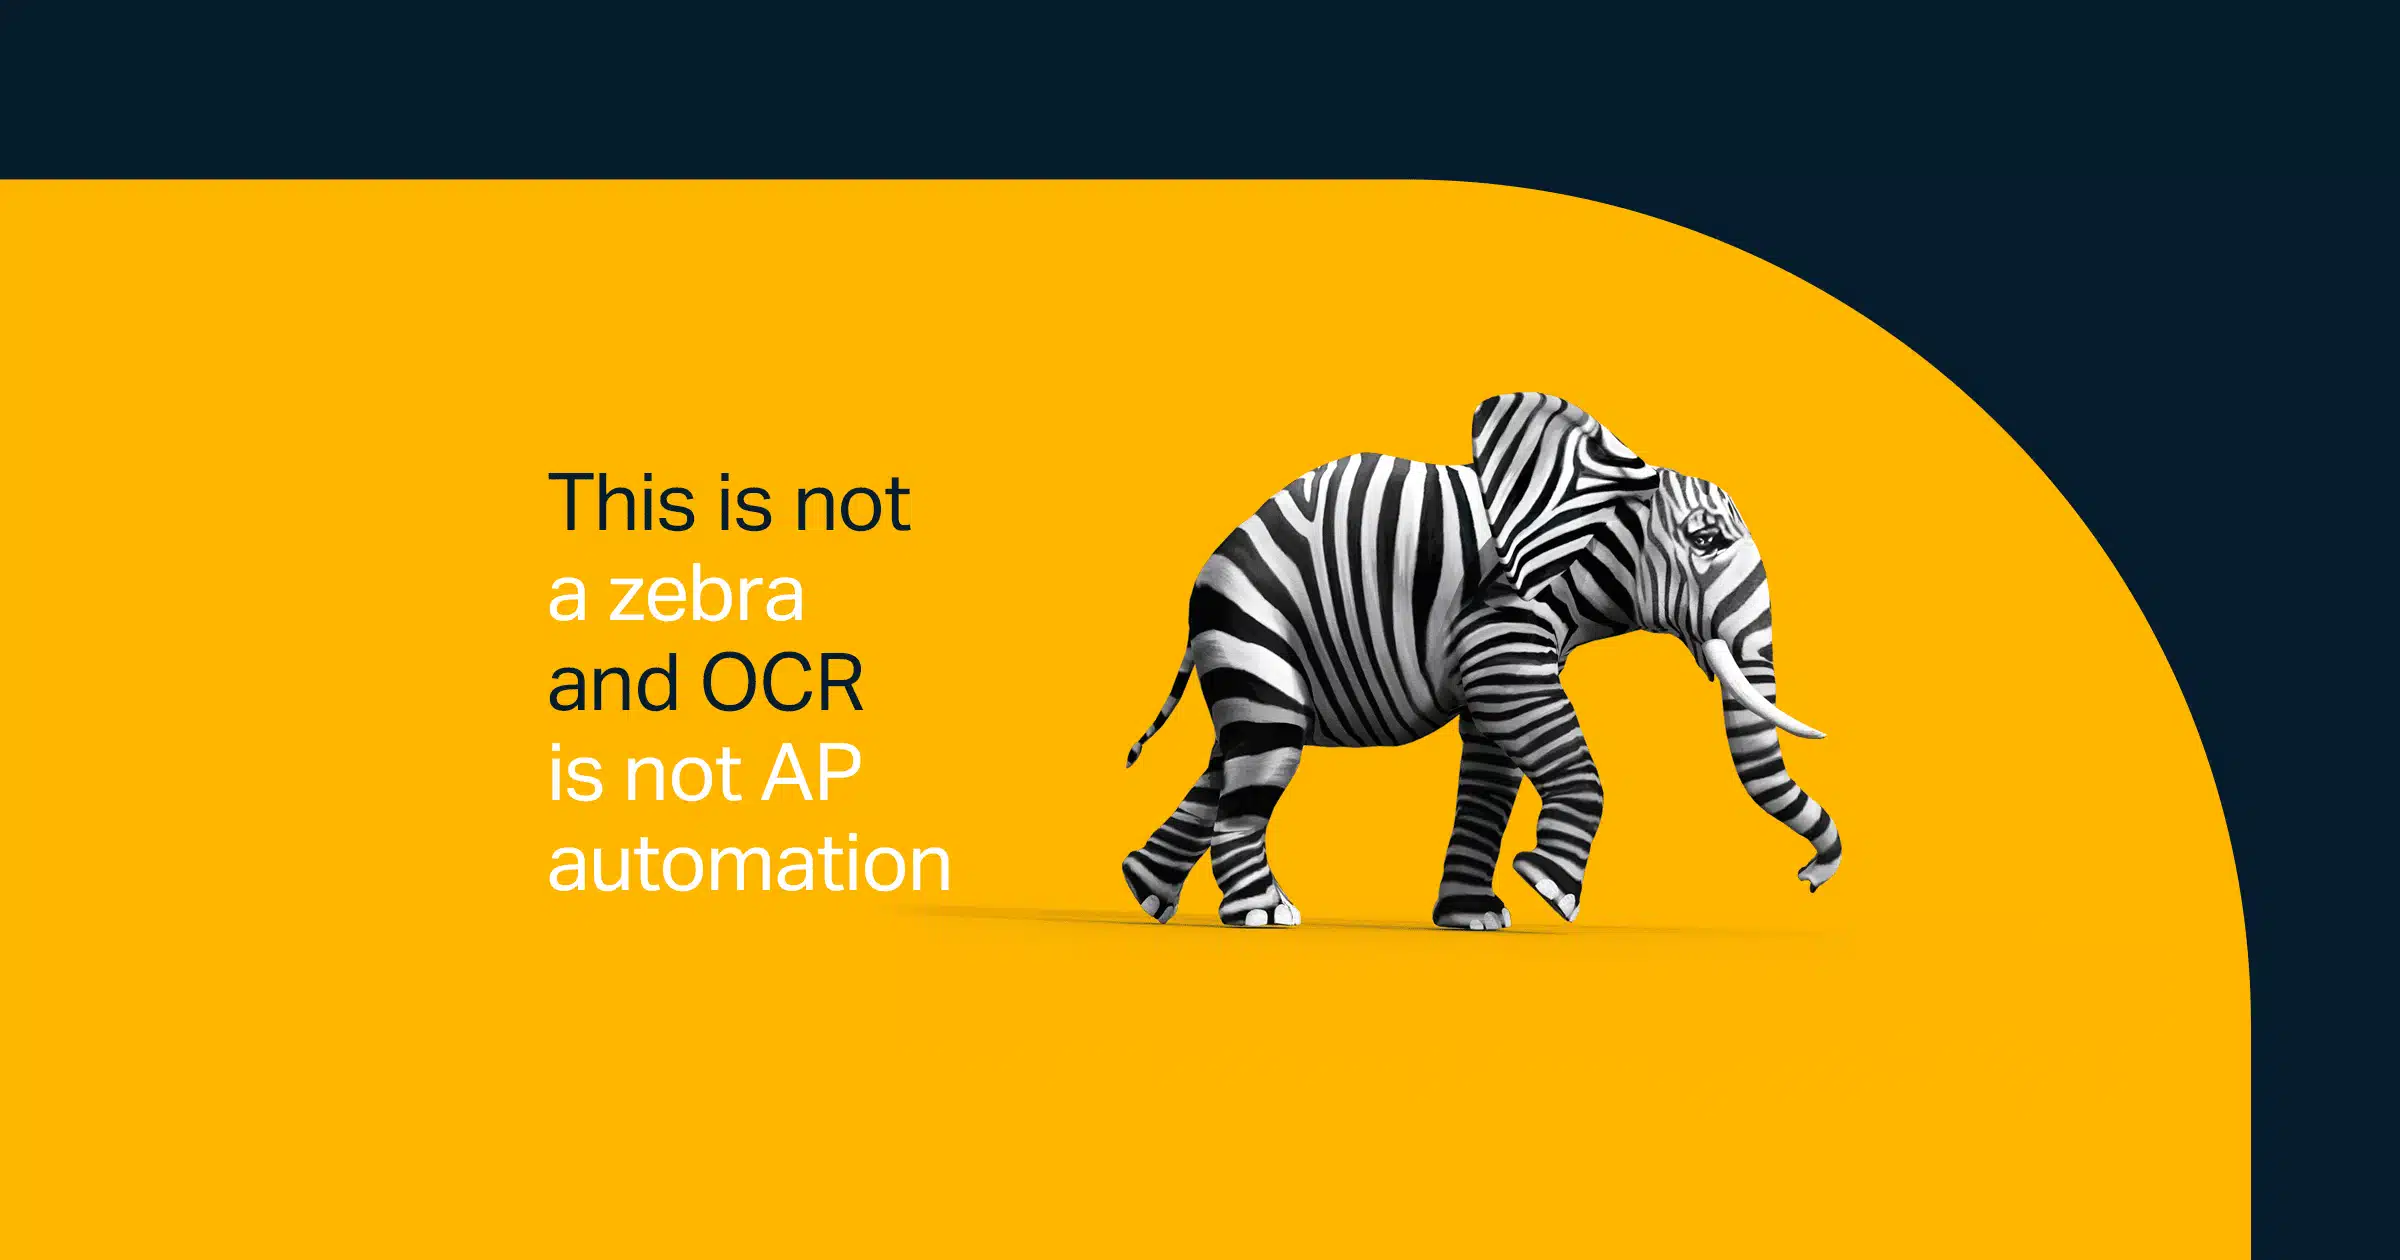 An OCR-enhanced zebra featuring the phrase this is not a cdc or ap automation.